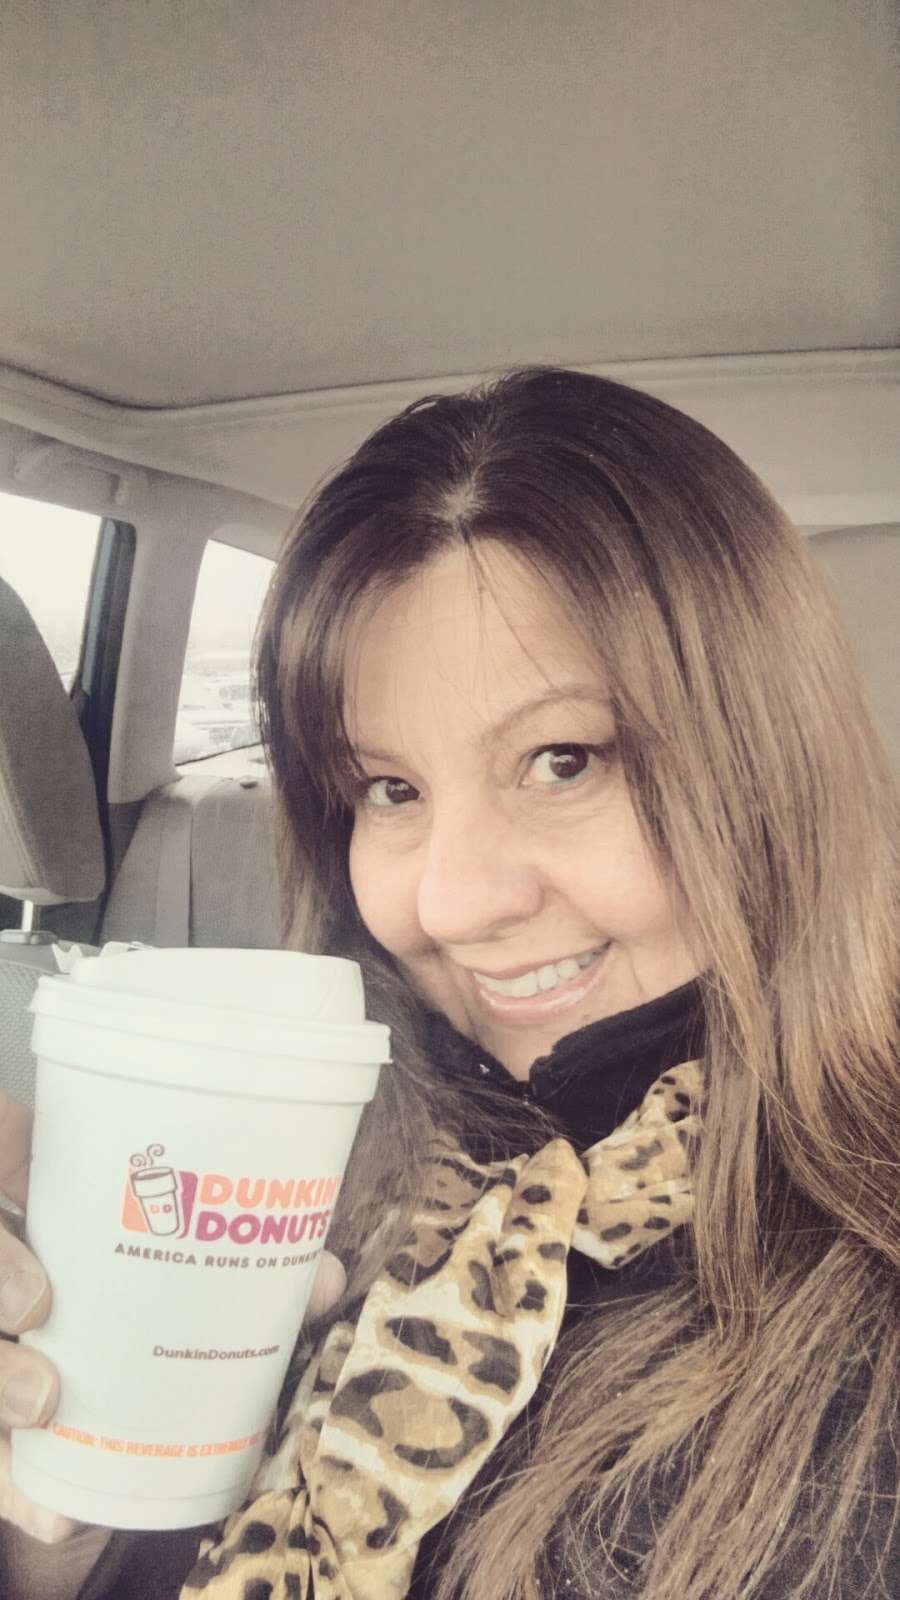 Dunkin Donuts | 3663 Lee Road, Jefferson Valley, NY 10535, USA | Phone: (914) 302-7569